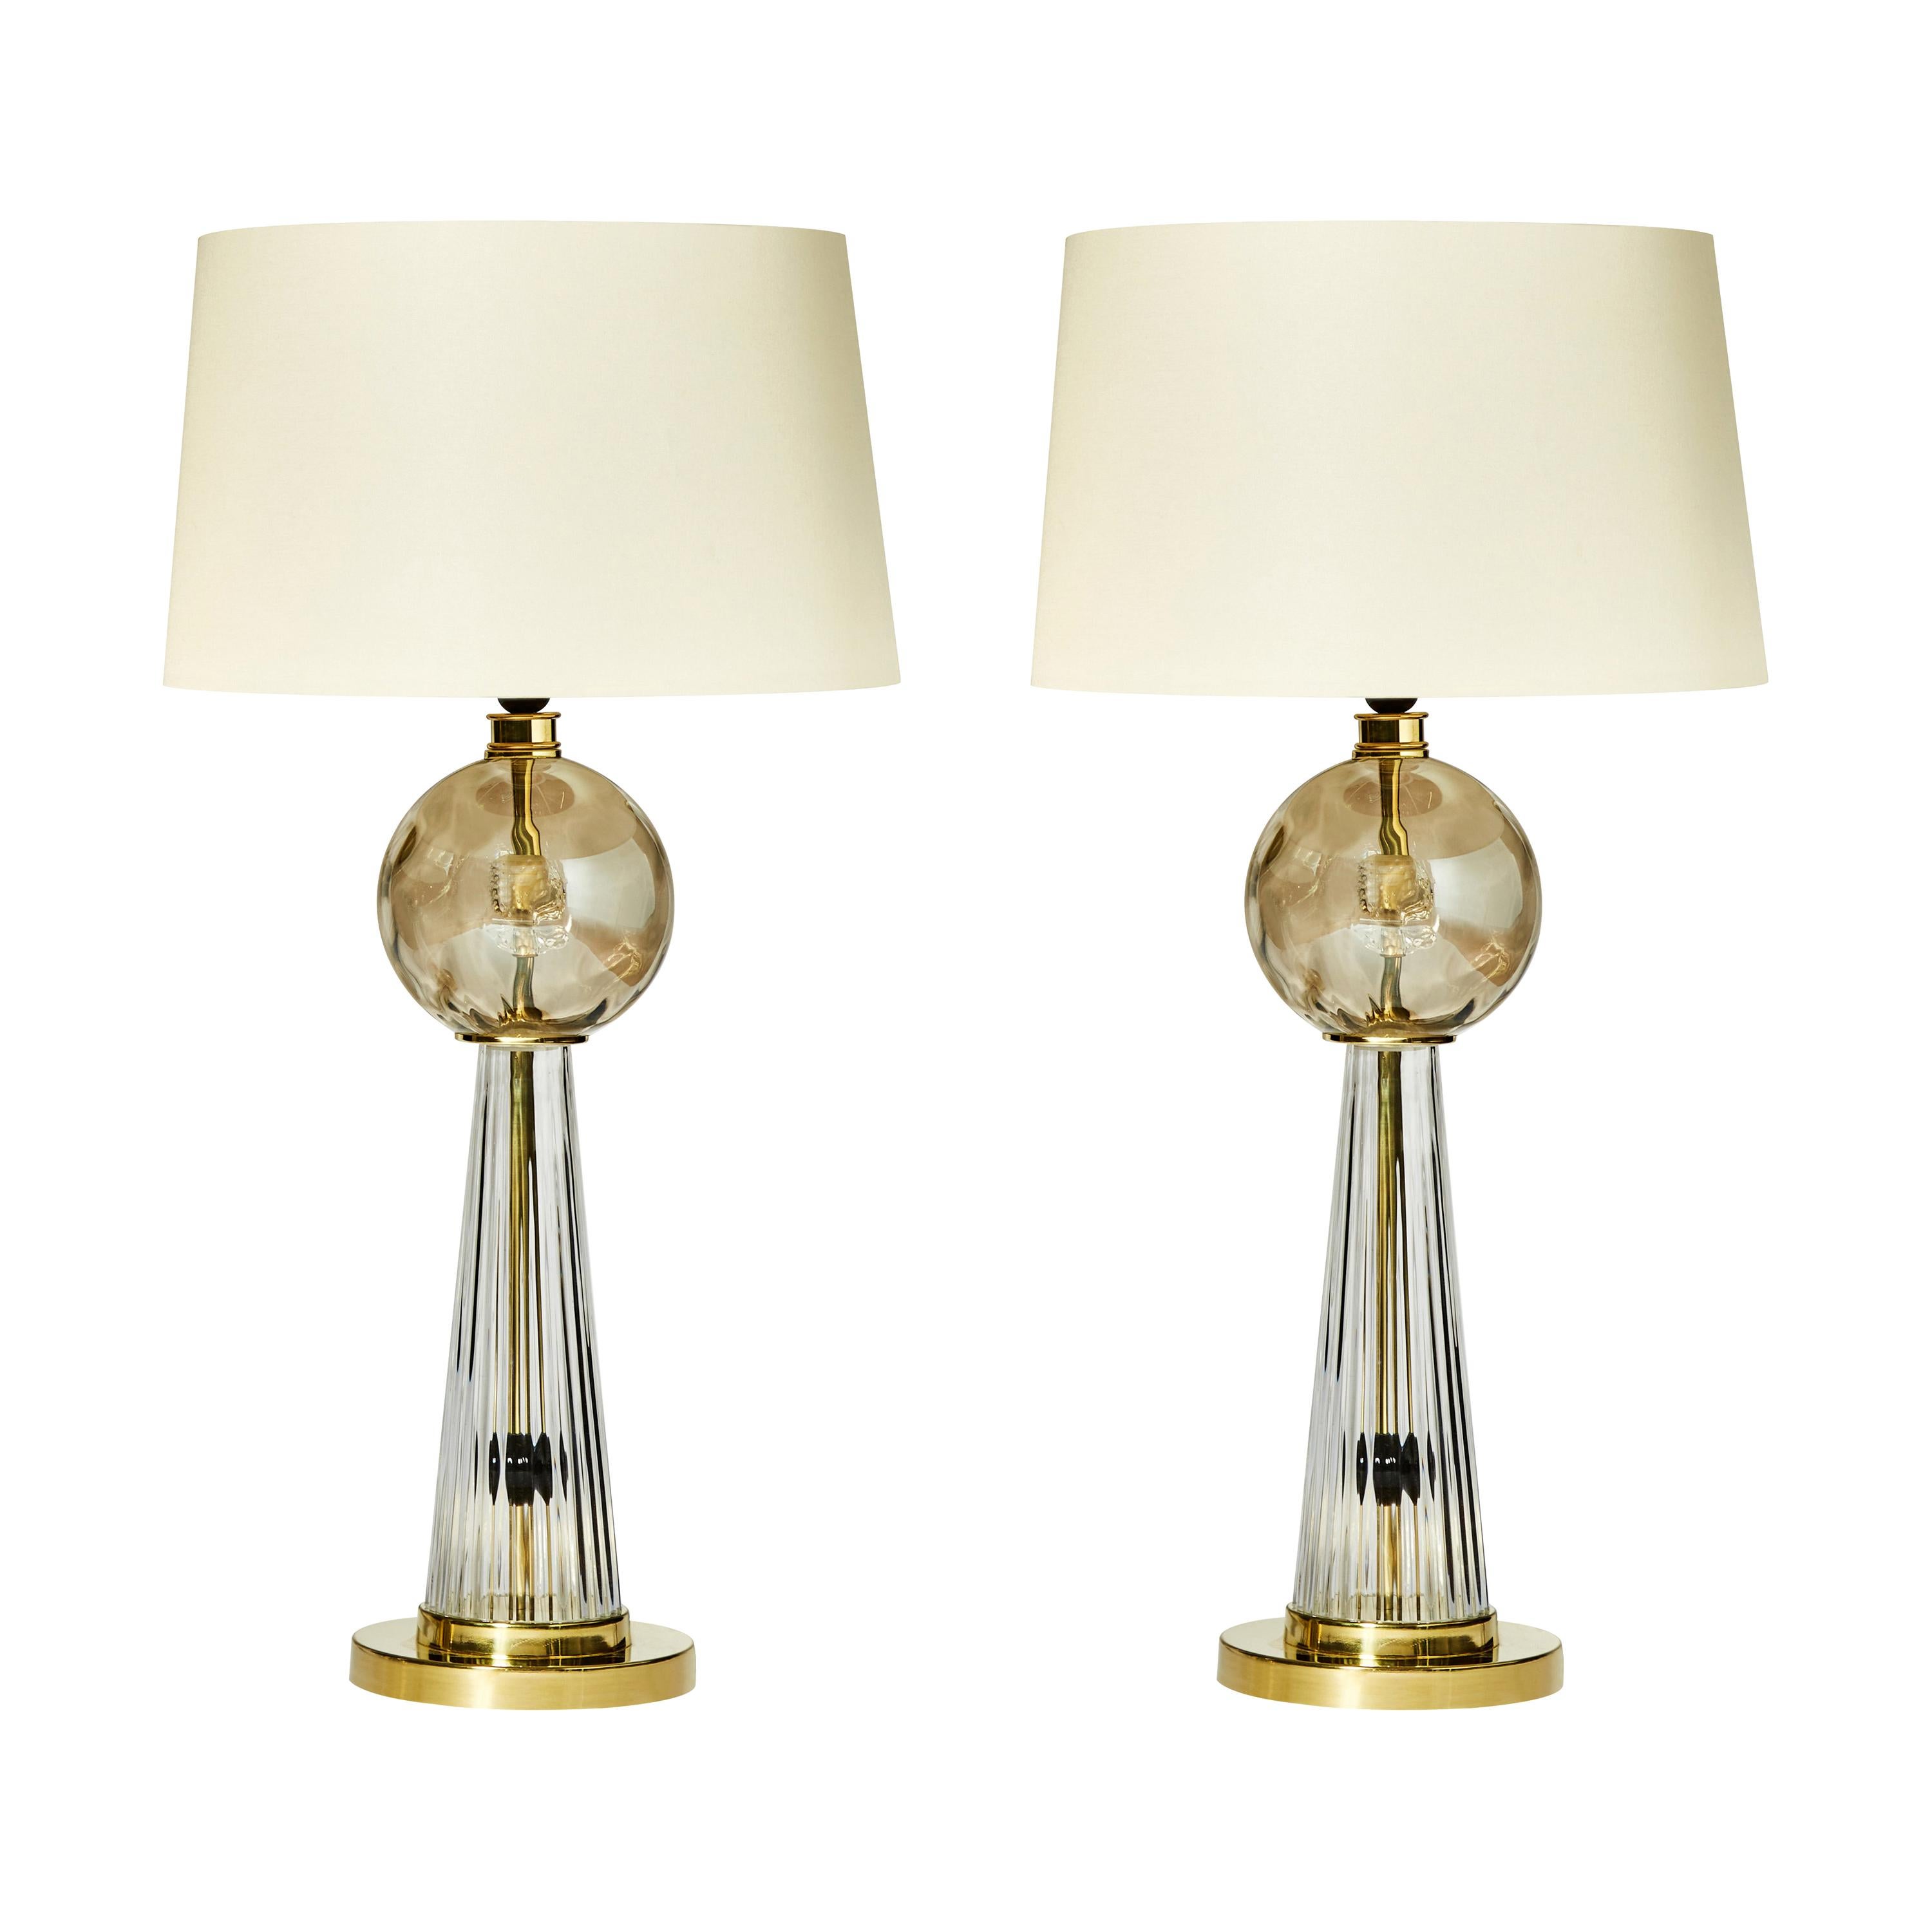 Pair of Brass Smokey and Golden Murano Glass Table Lamps